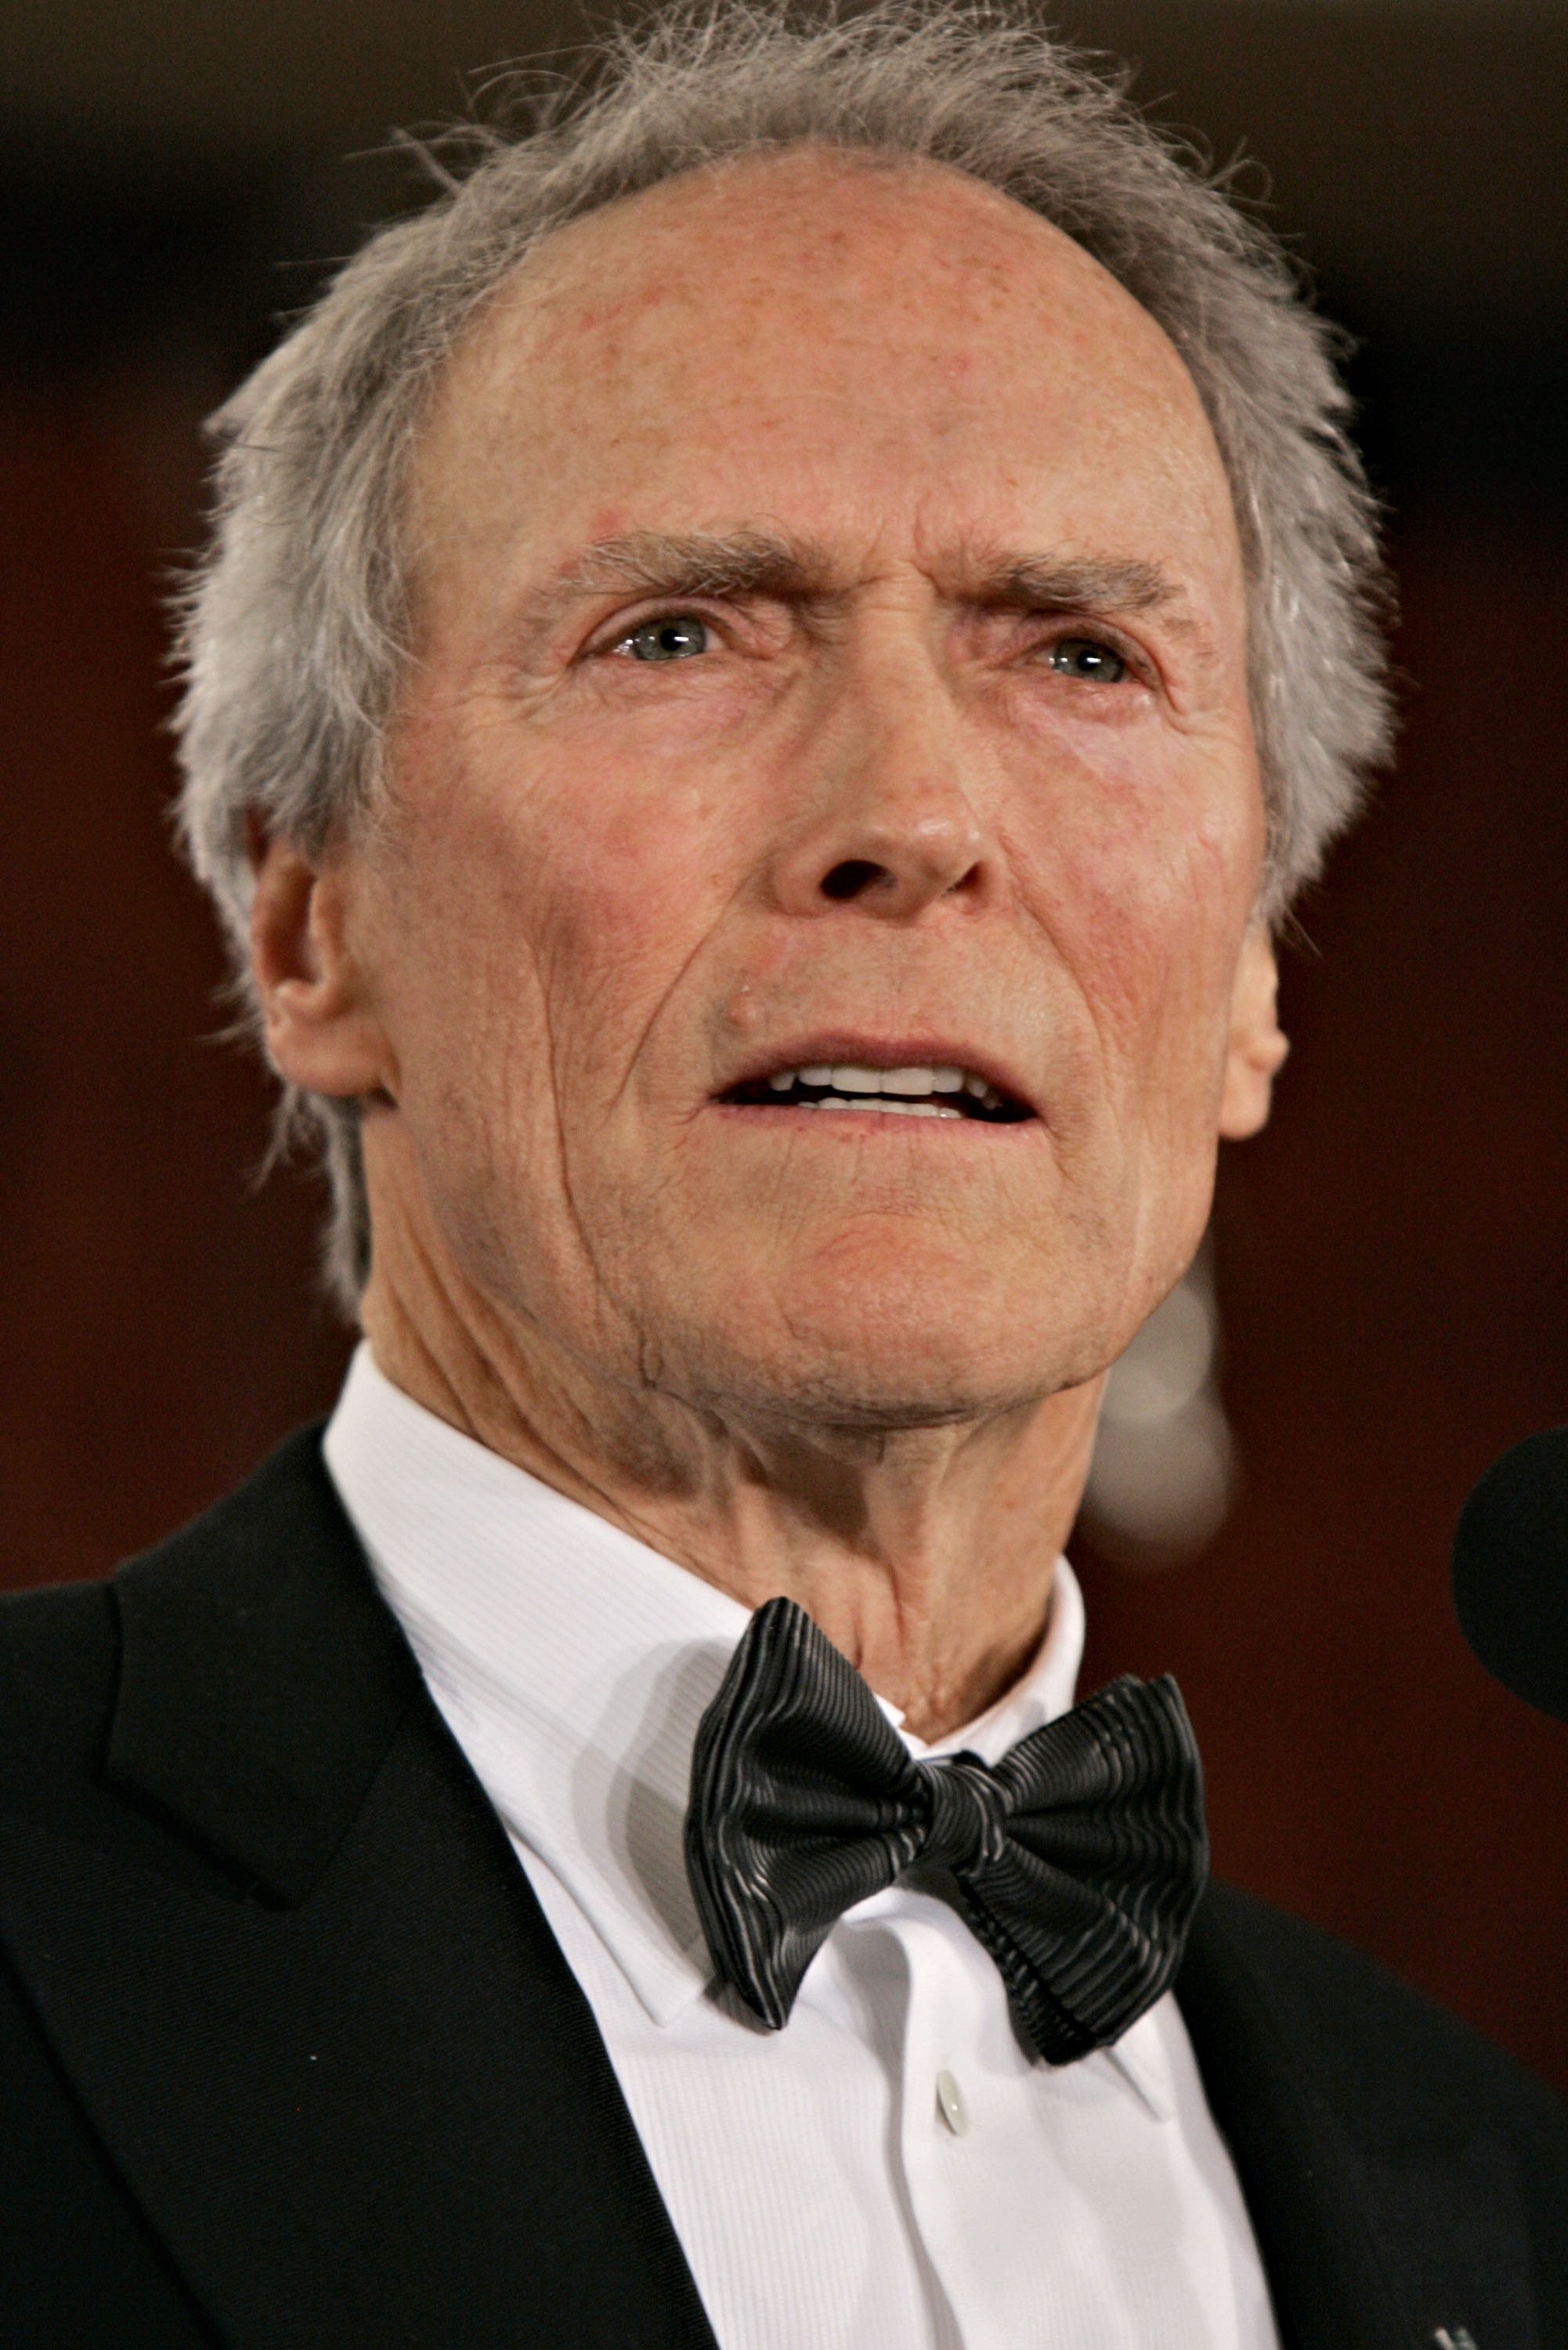 Director Clint Eastwood speaks after accepting his Lifetime Achievement Award in the press room during the 58th Annual Directors Guild Of America Awards at Hyatt Regency Century Plaza on January 28, 2006 in Los Angeles, California. | Photo: Getty Images